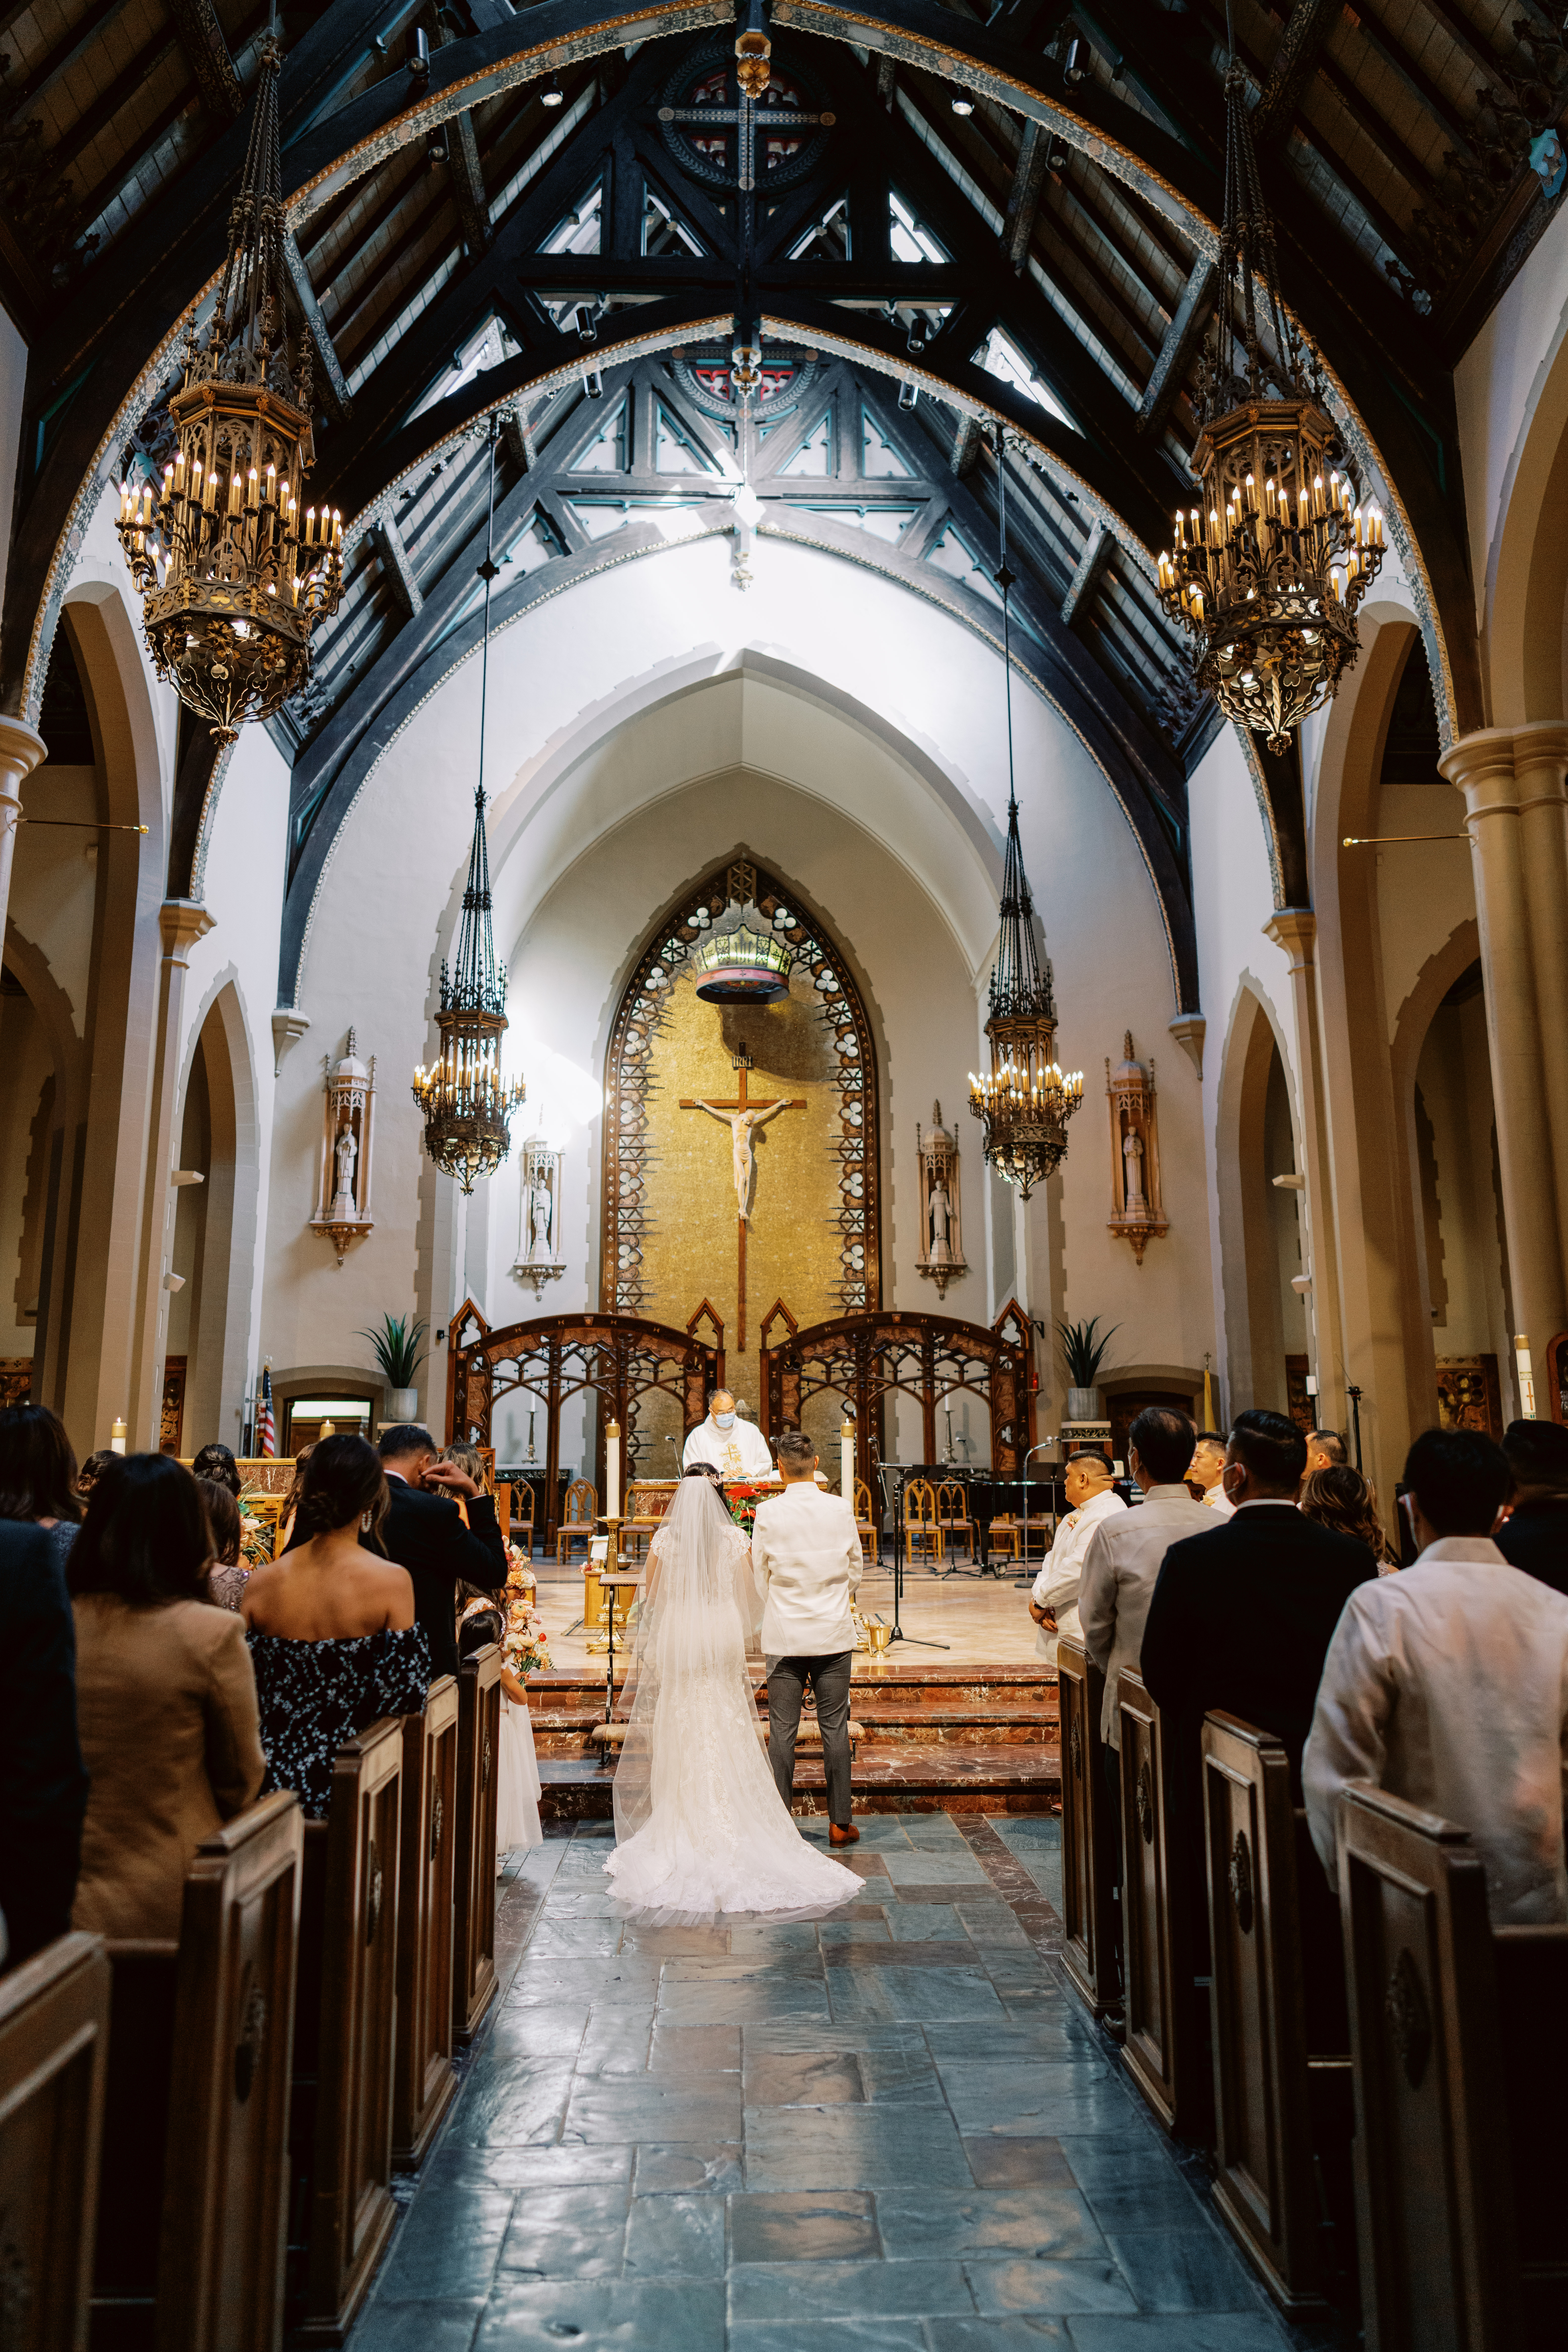 bride and groom at altar in Catholic Church wedding ceremony